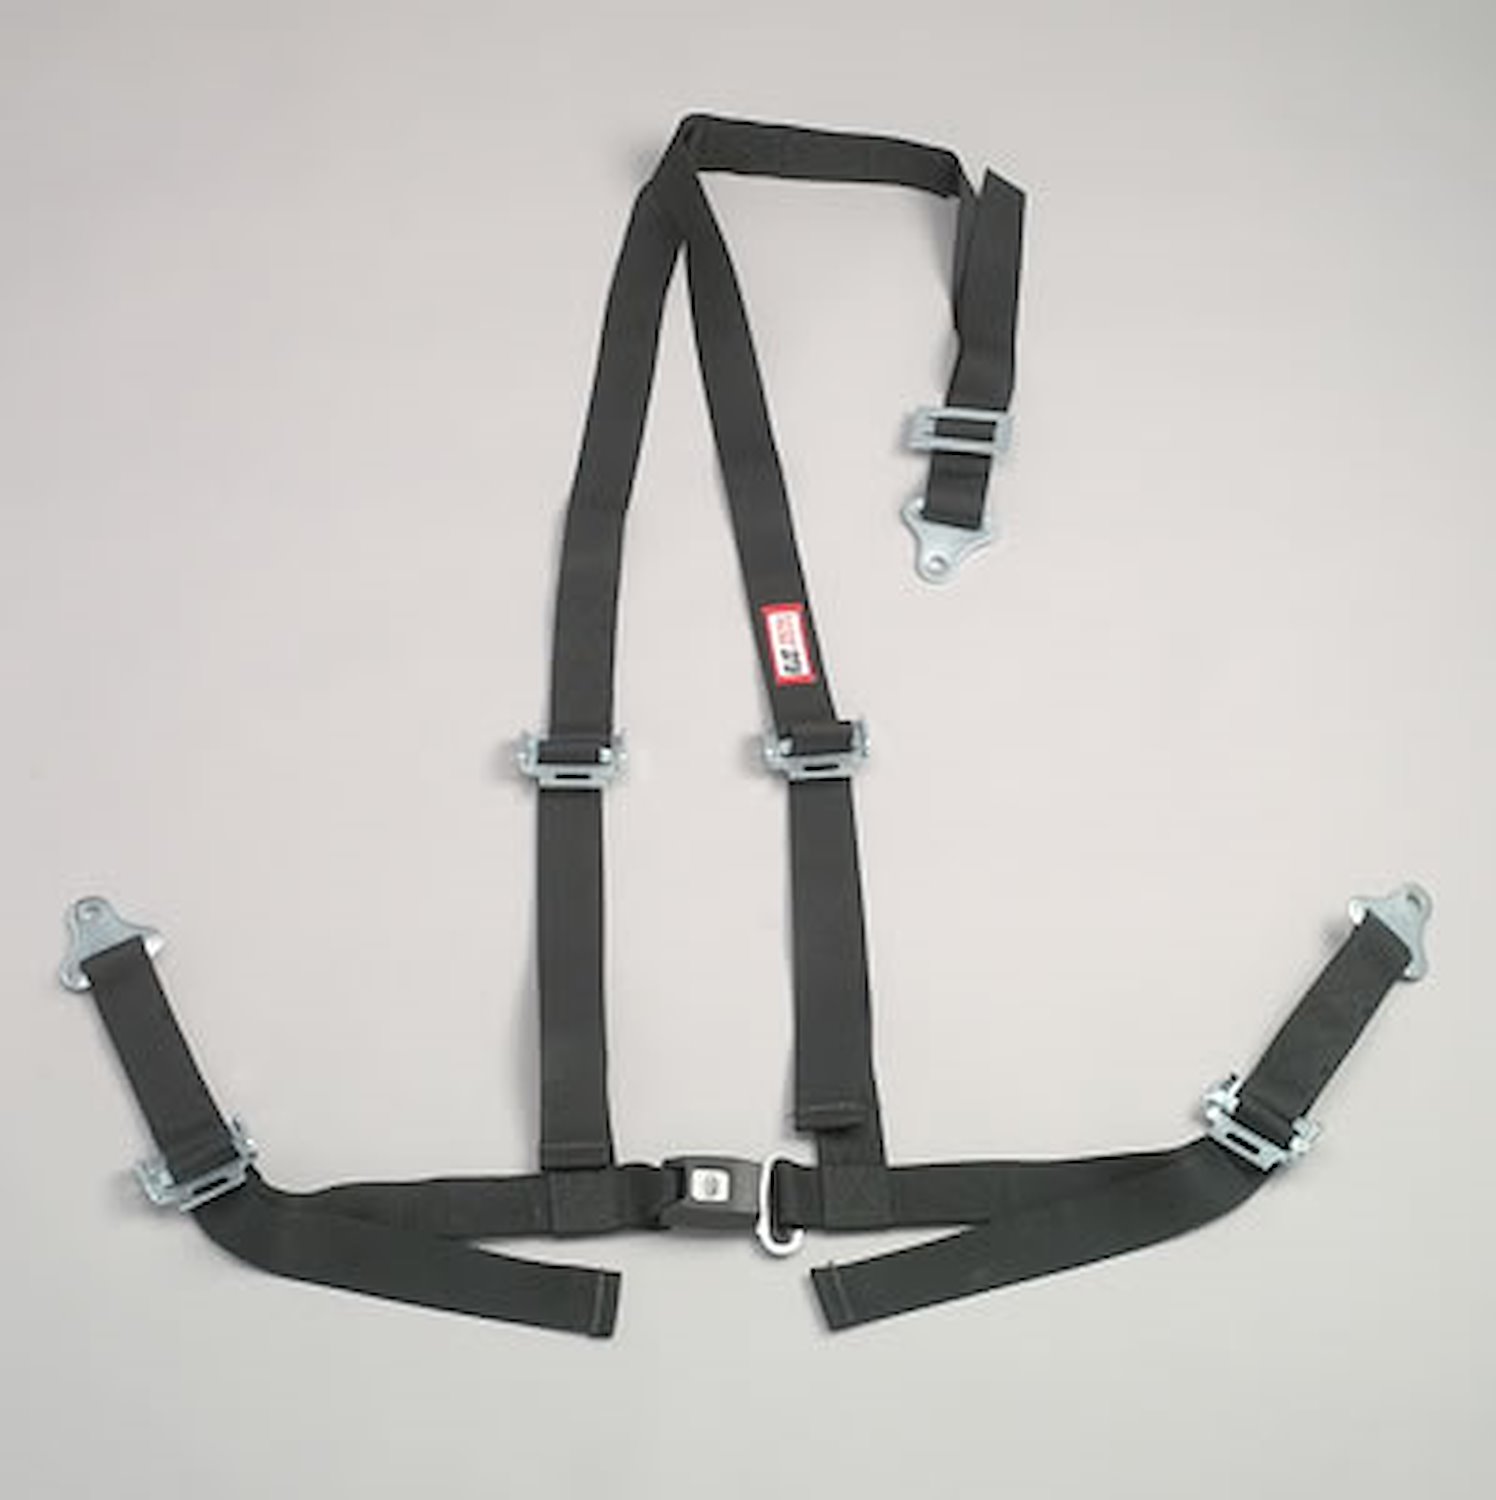 NON-SFI B&T HARNESS 2 PULL DOWN Lap Belt SNAP 2 S. H. Y FLOOR Mount WRAP/SNAP w/STERNUM STRAP GRAY